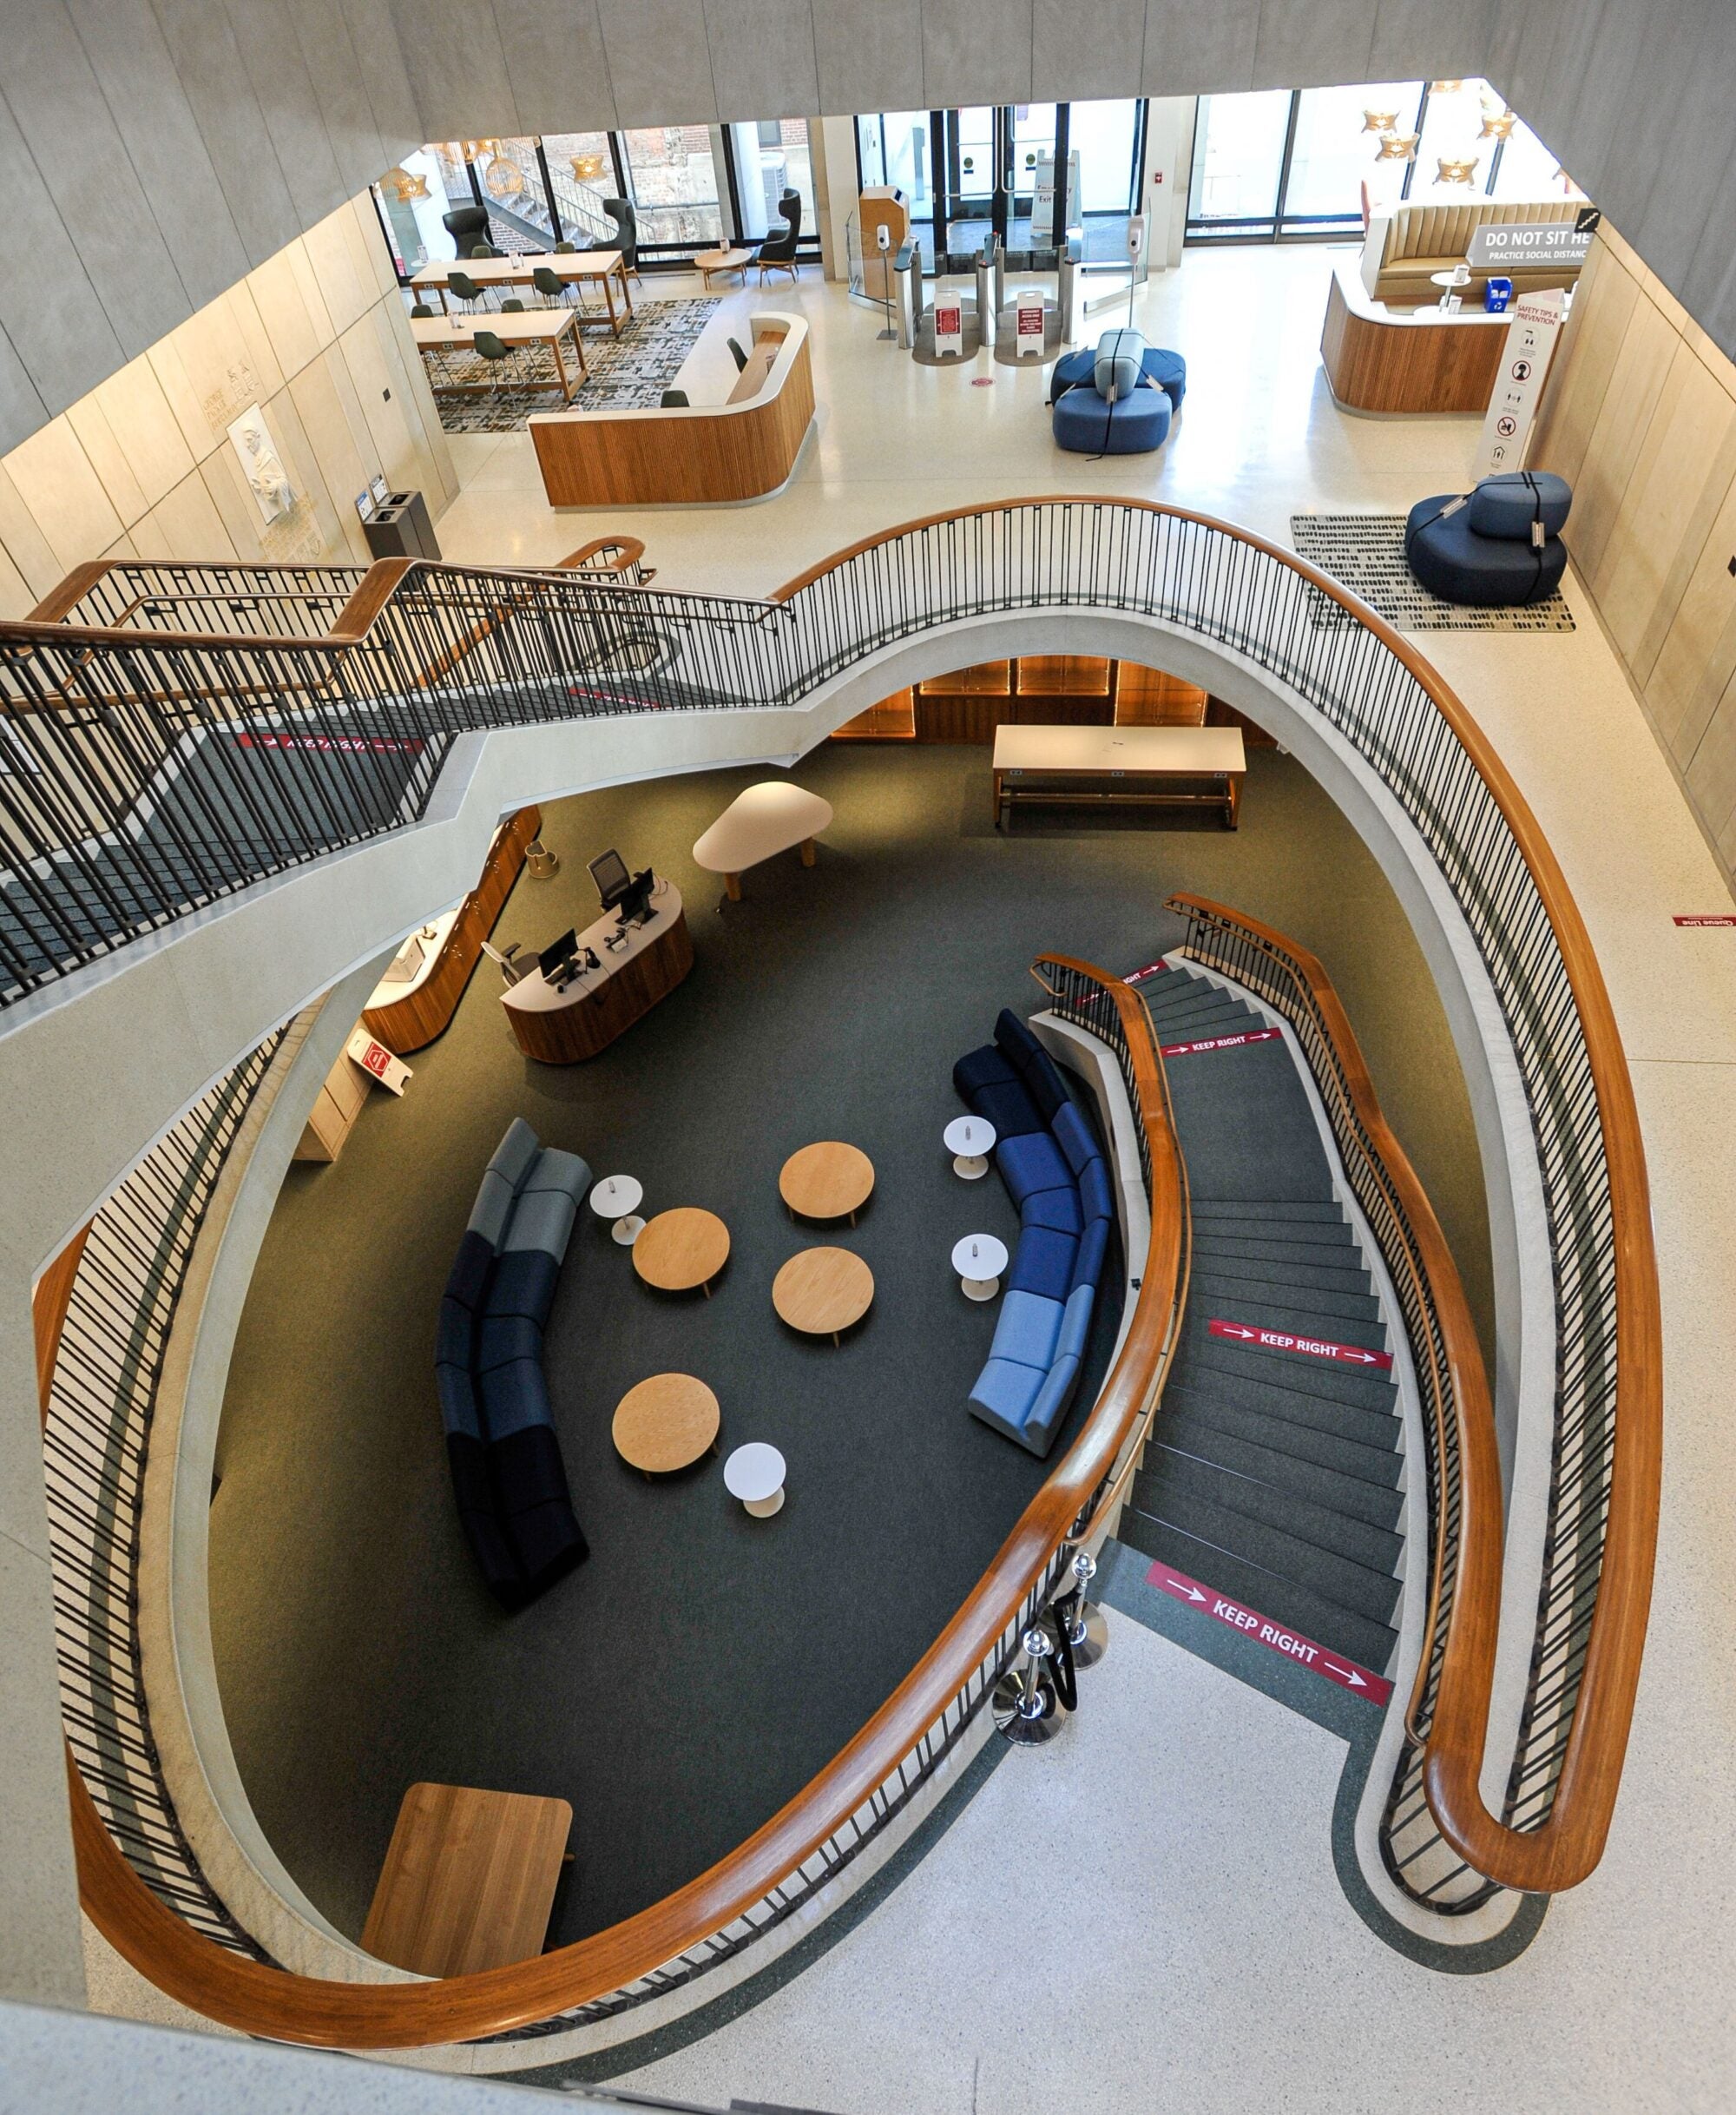 The view of Countway Library from the top of the spiral stairs